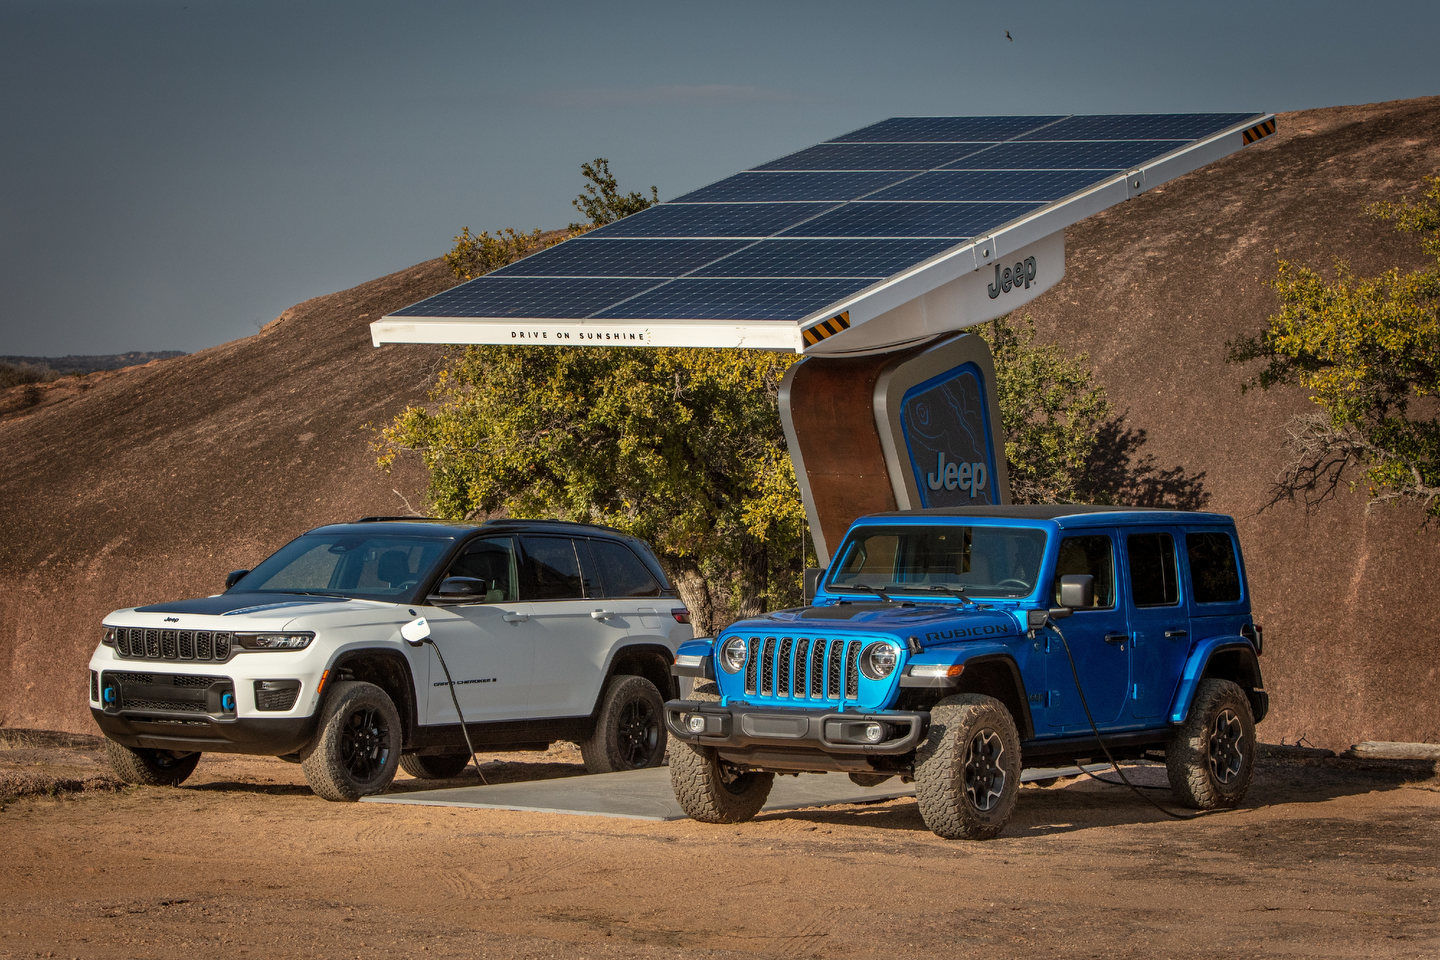 Jeep's 4xe Powertrains: Electrifying the Off-Road Experience